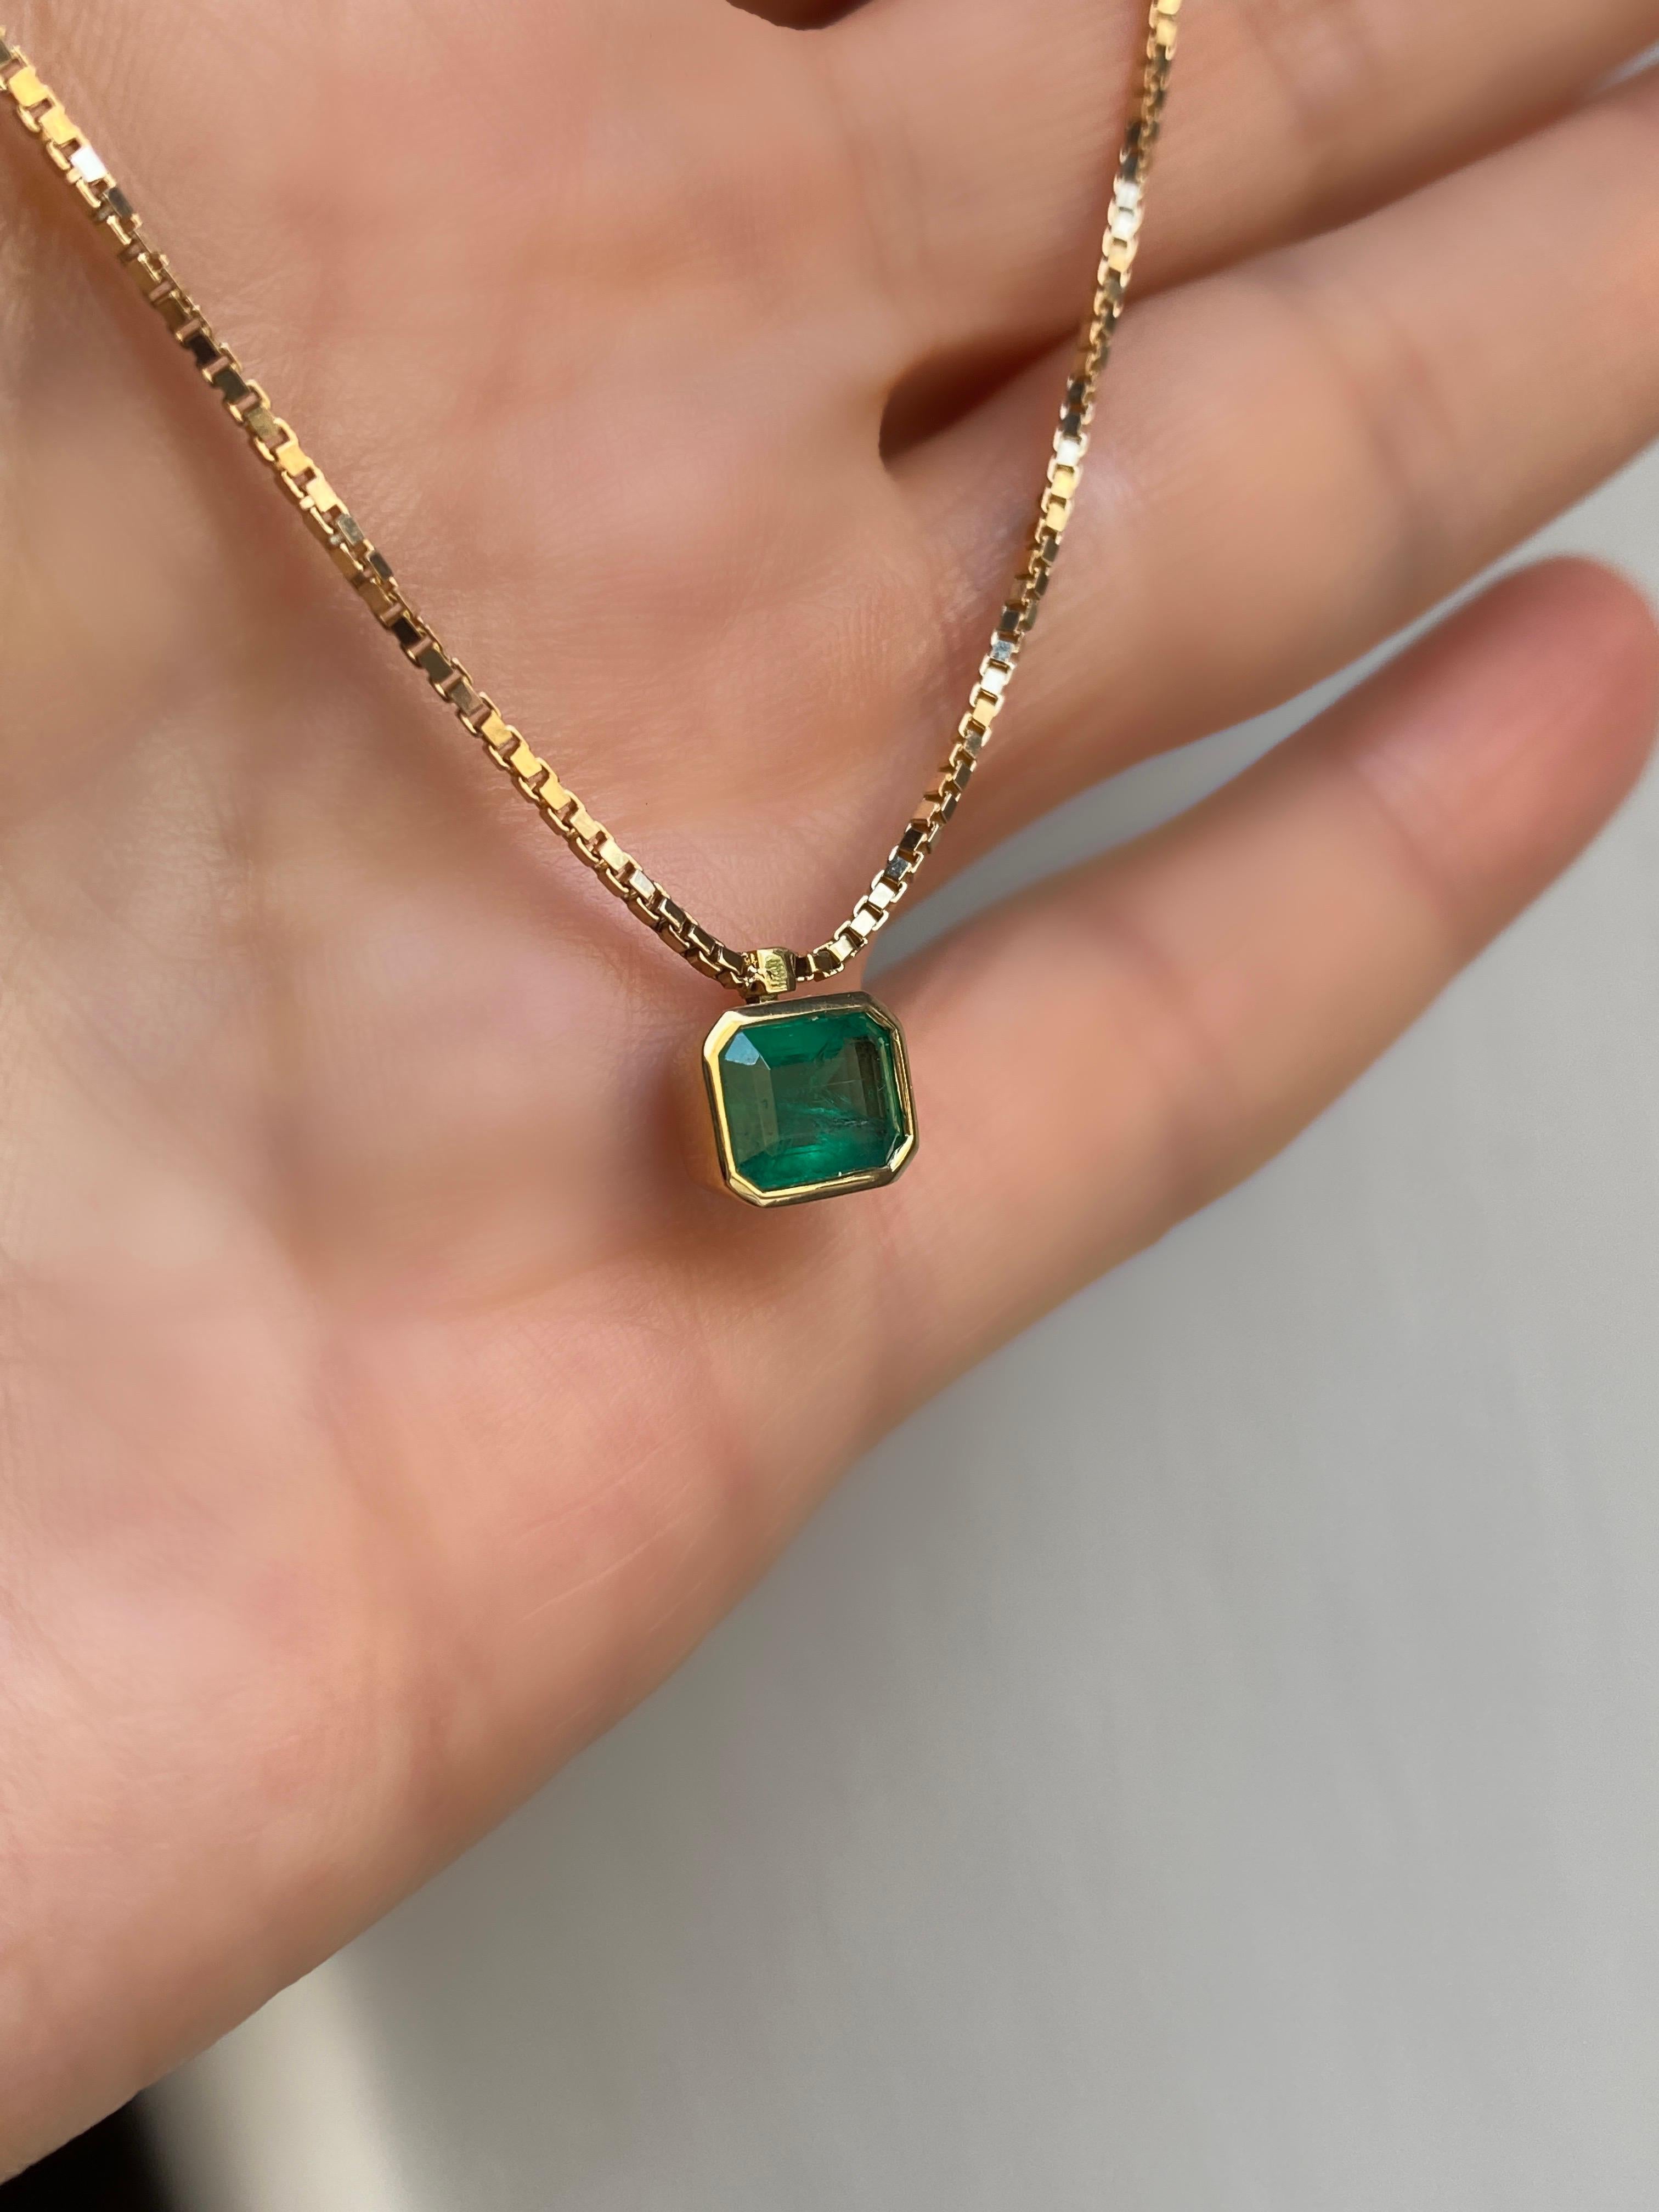 Discover the embodiment of timeless elegance in the Rossella Ugolini Emerald Necklace, a masterpiece crafted in Italy with the modern man in mind. This necklace transcends traditional jewelry; it's a symbol of your refined taste and appreciation for